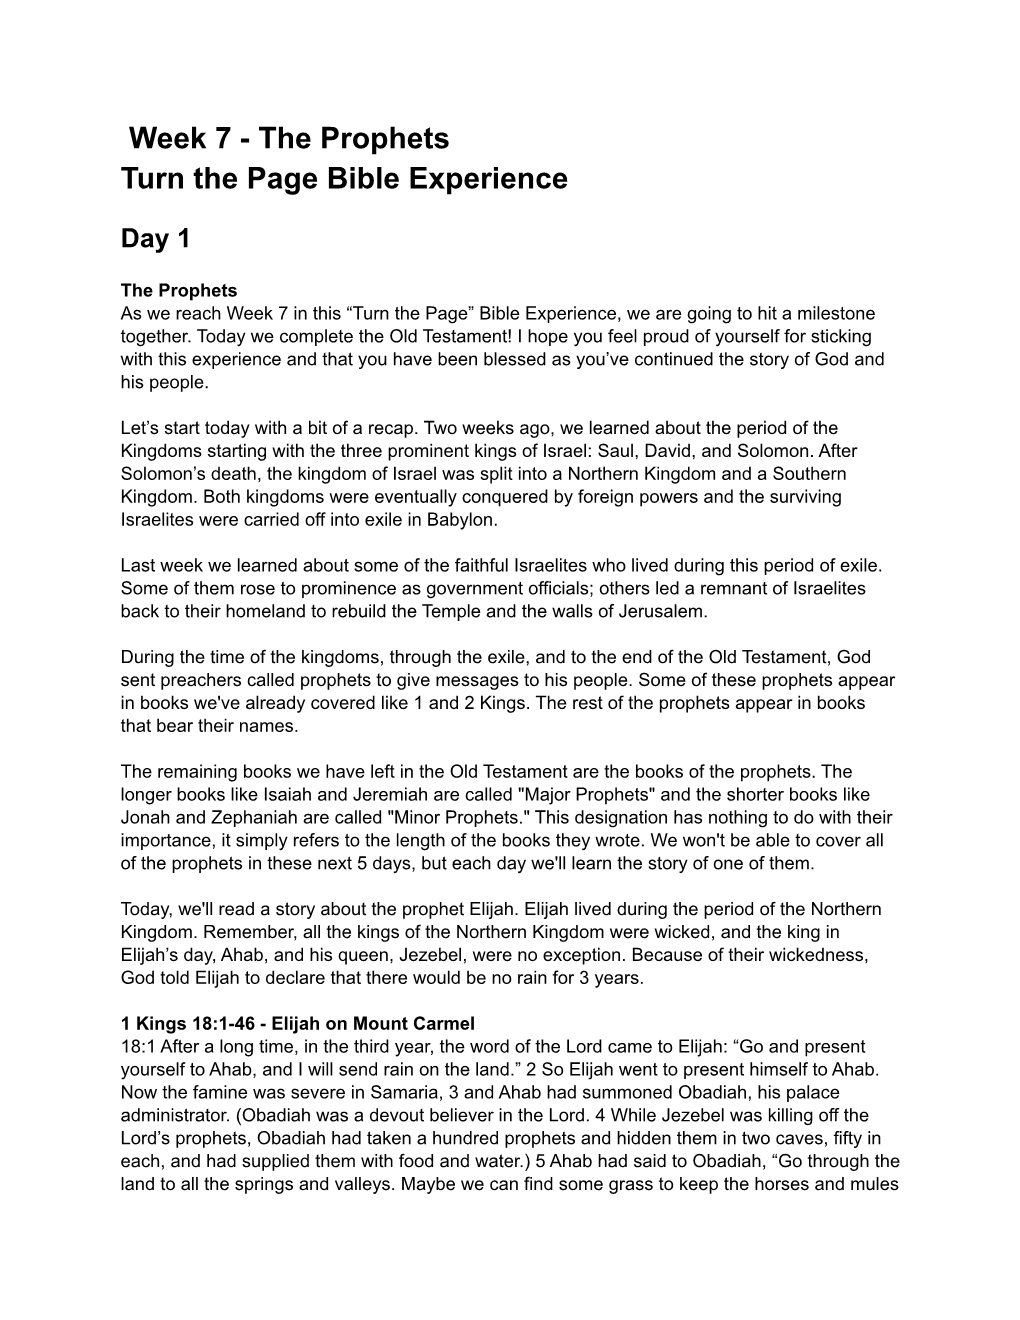 Week 7 - the Prophets Turn the Page Bible Experience